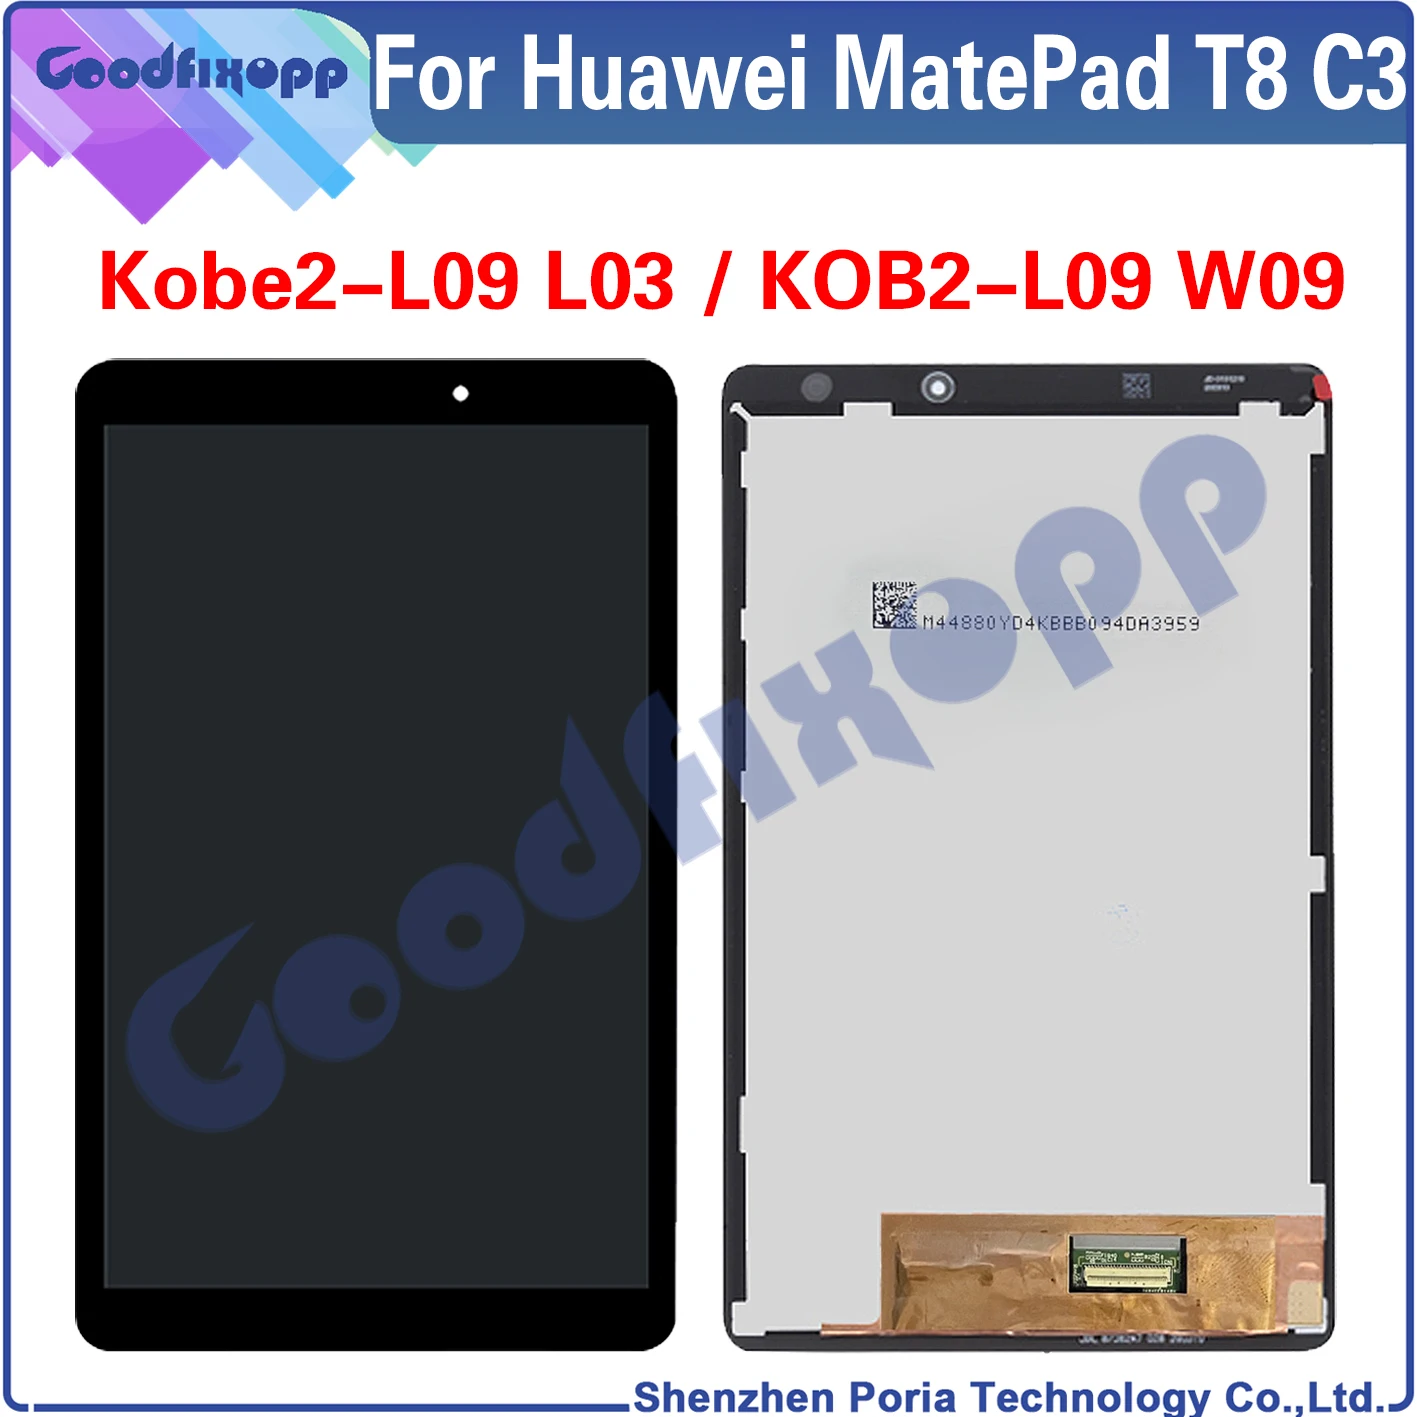 

For Huawei MatePad T8 C3 8.0 KOB2-W09 KOB2-L09 BZD-AL00 LCD Display Touch Screen Digitizer Assembly Replacement